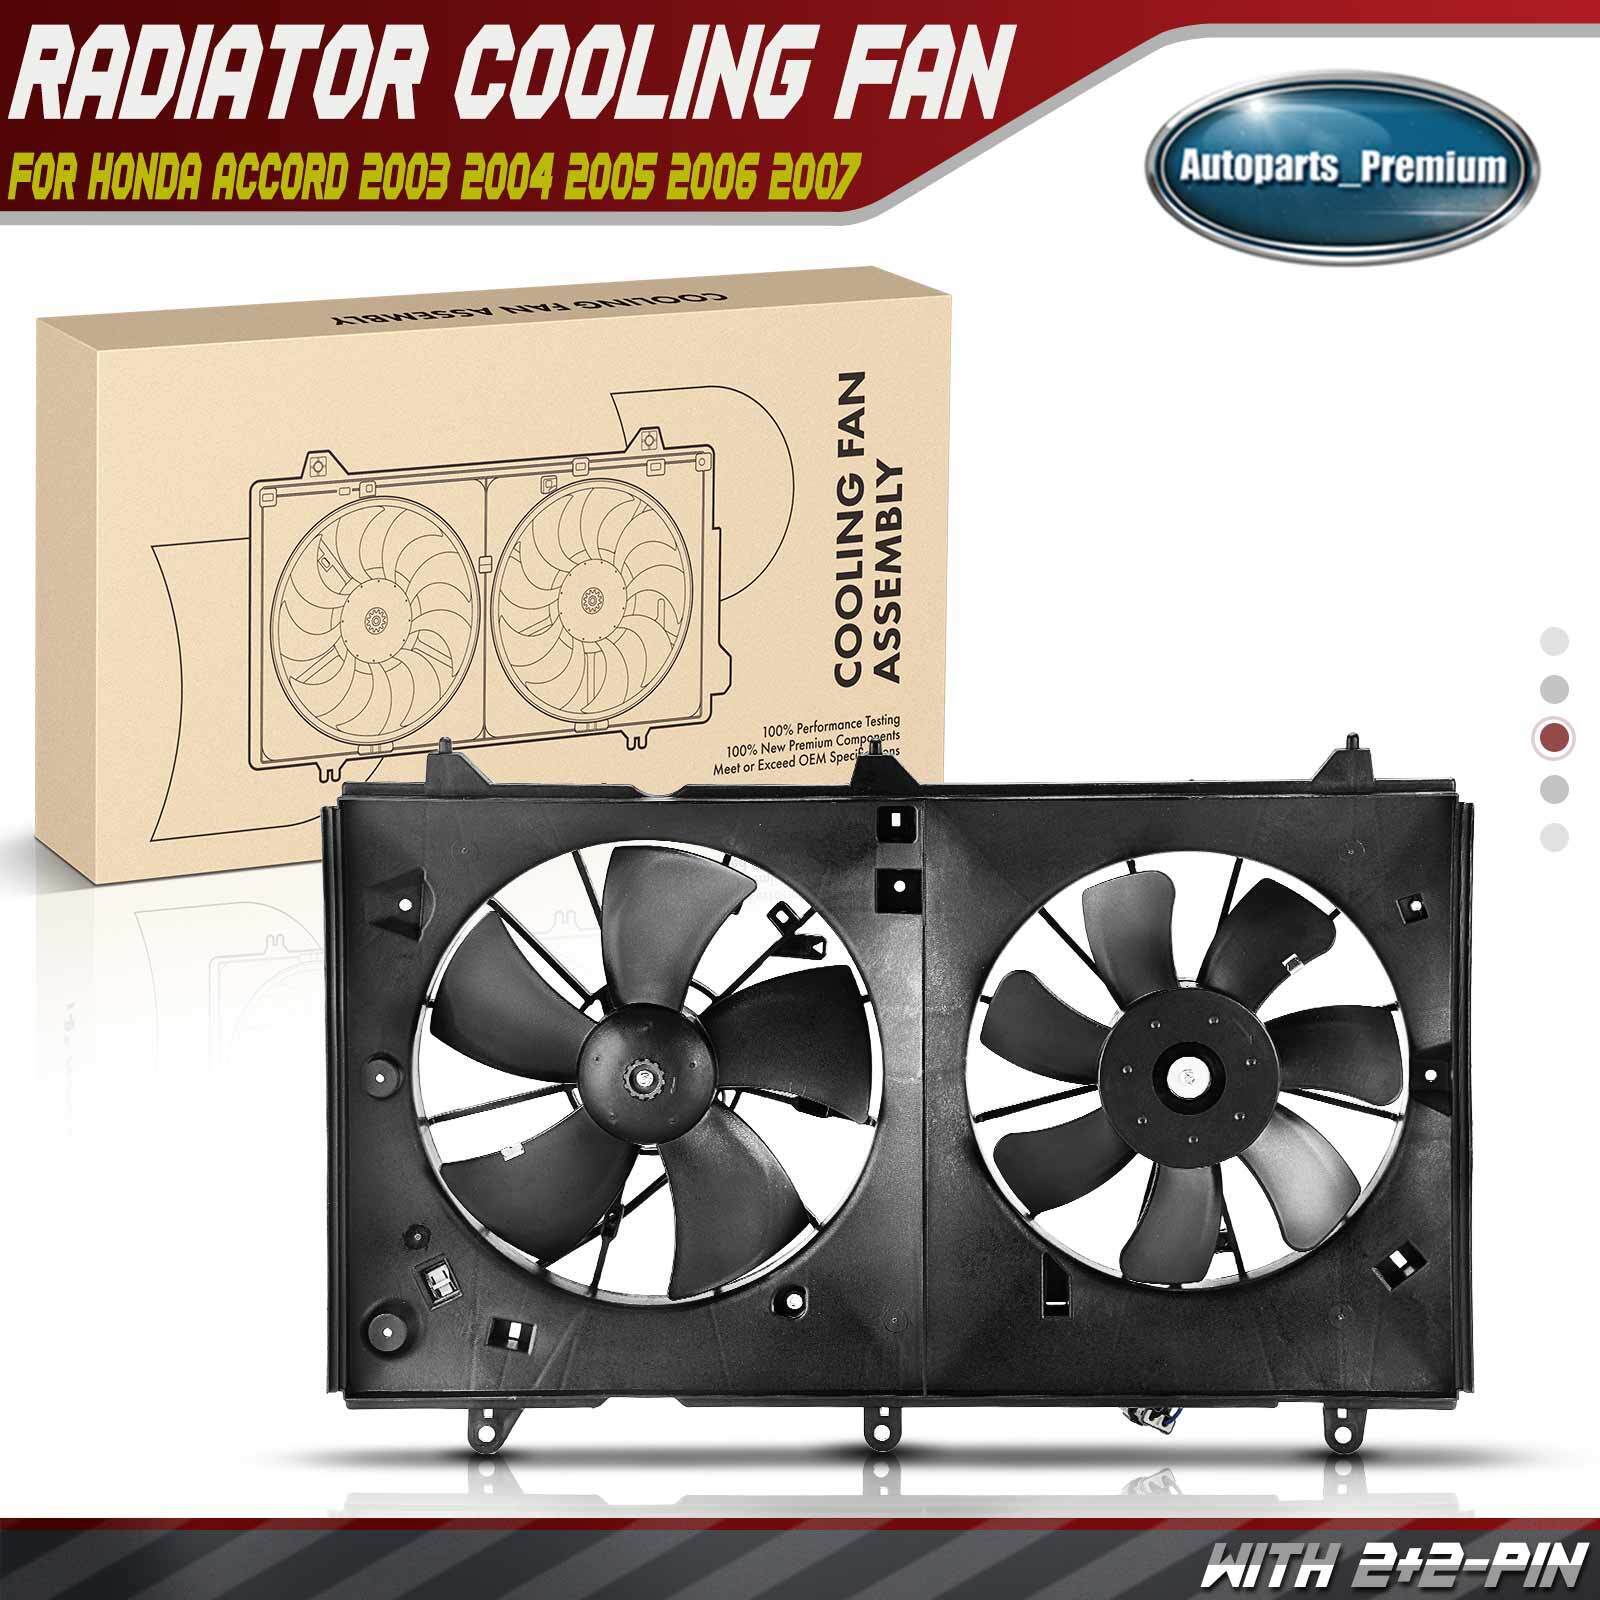 Dual Engine Radiator Cooling Fan with Shroud Assembly for Honda Accord 2003-2007